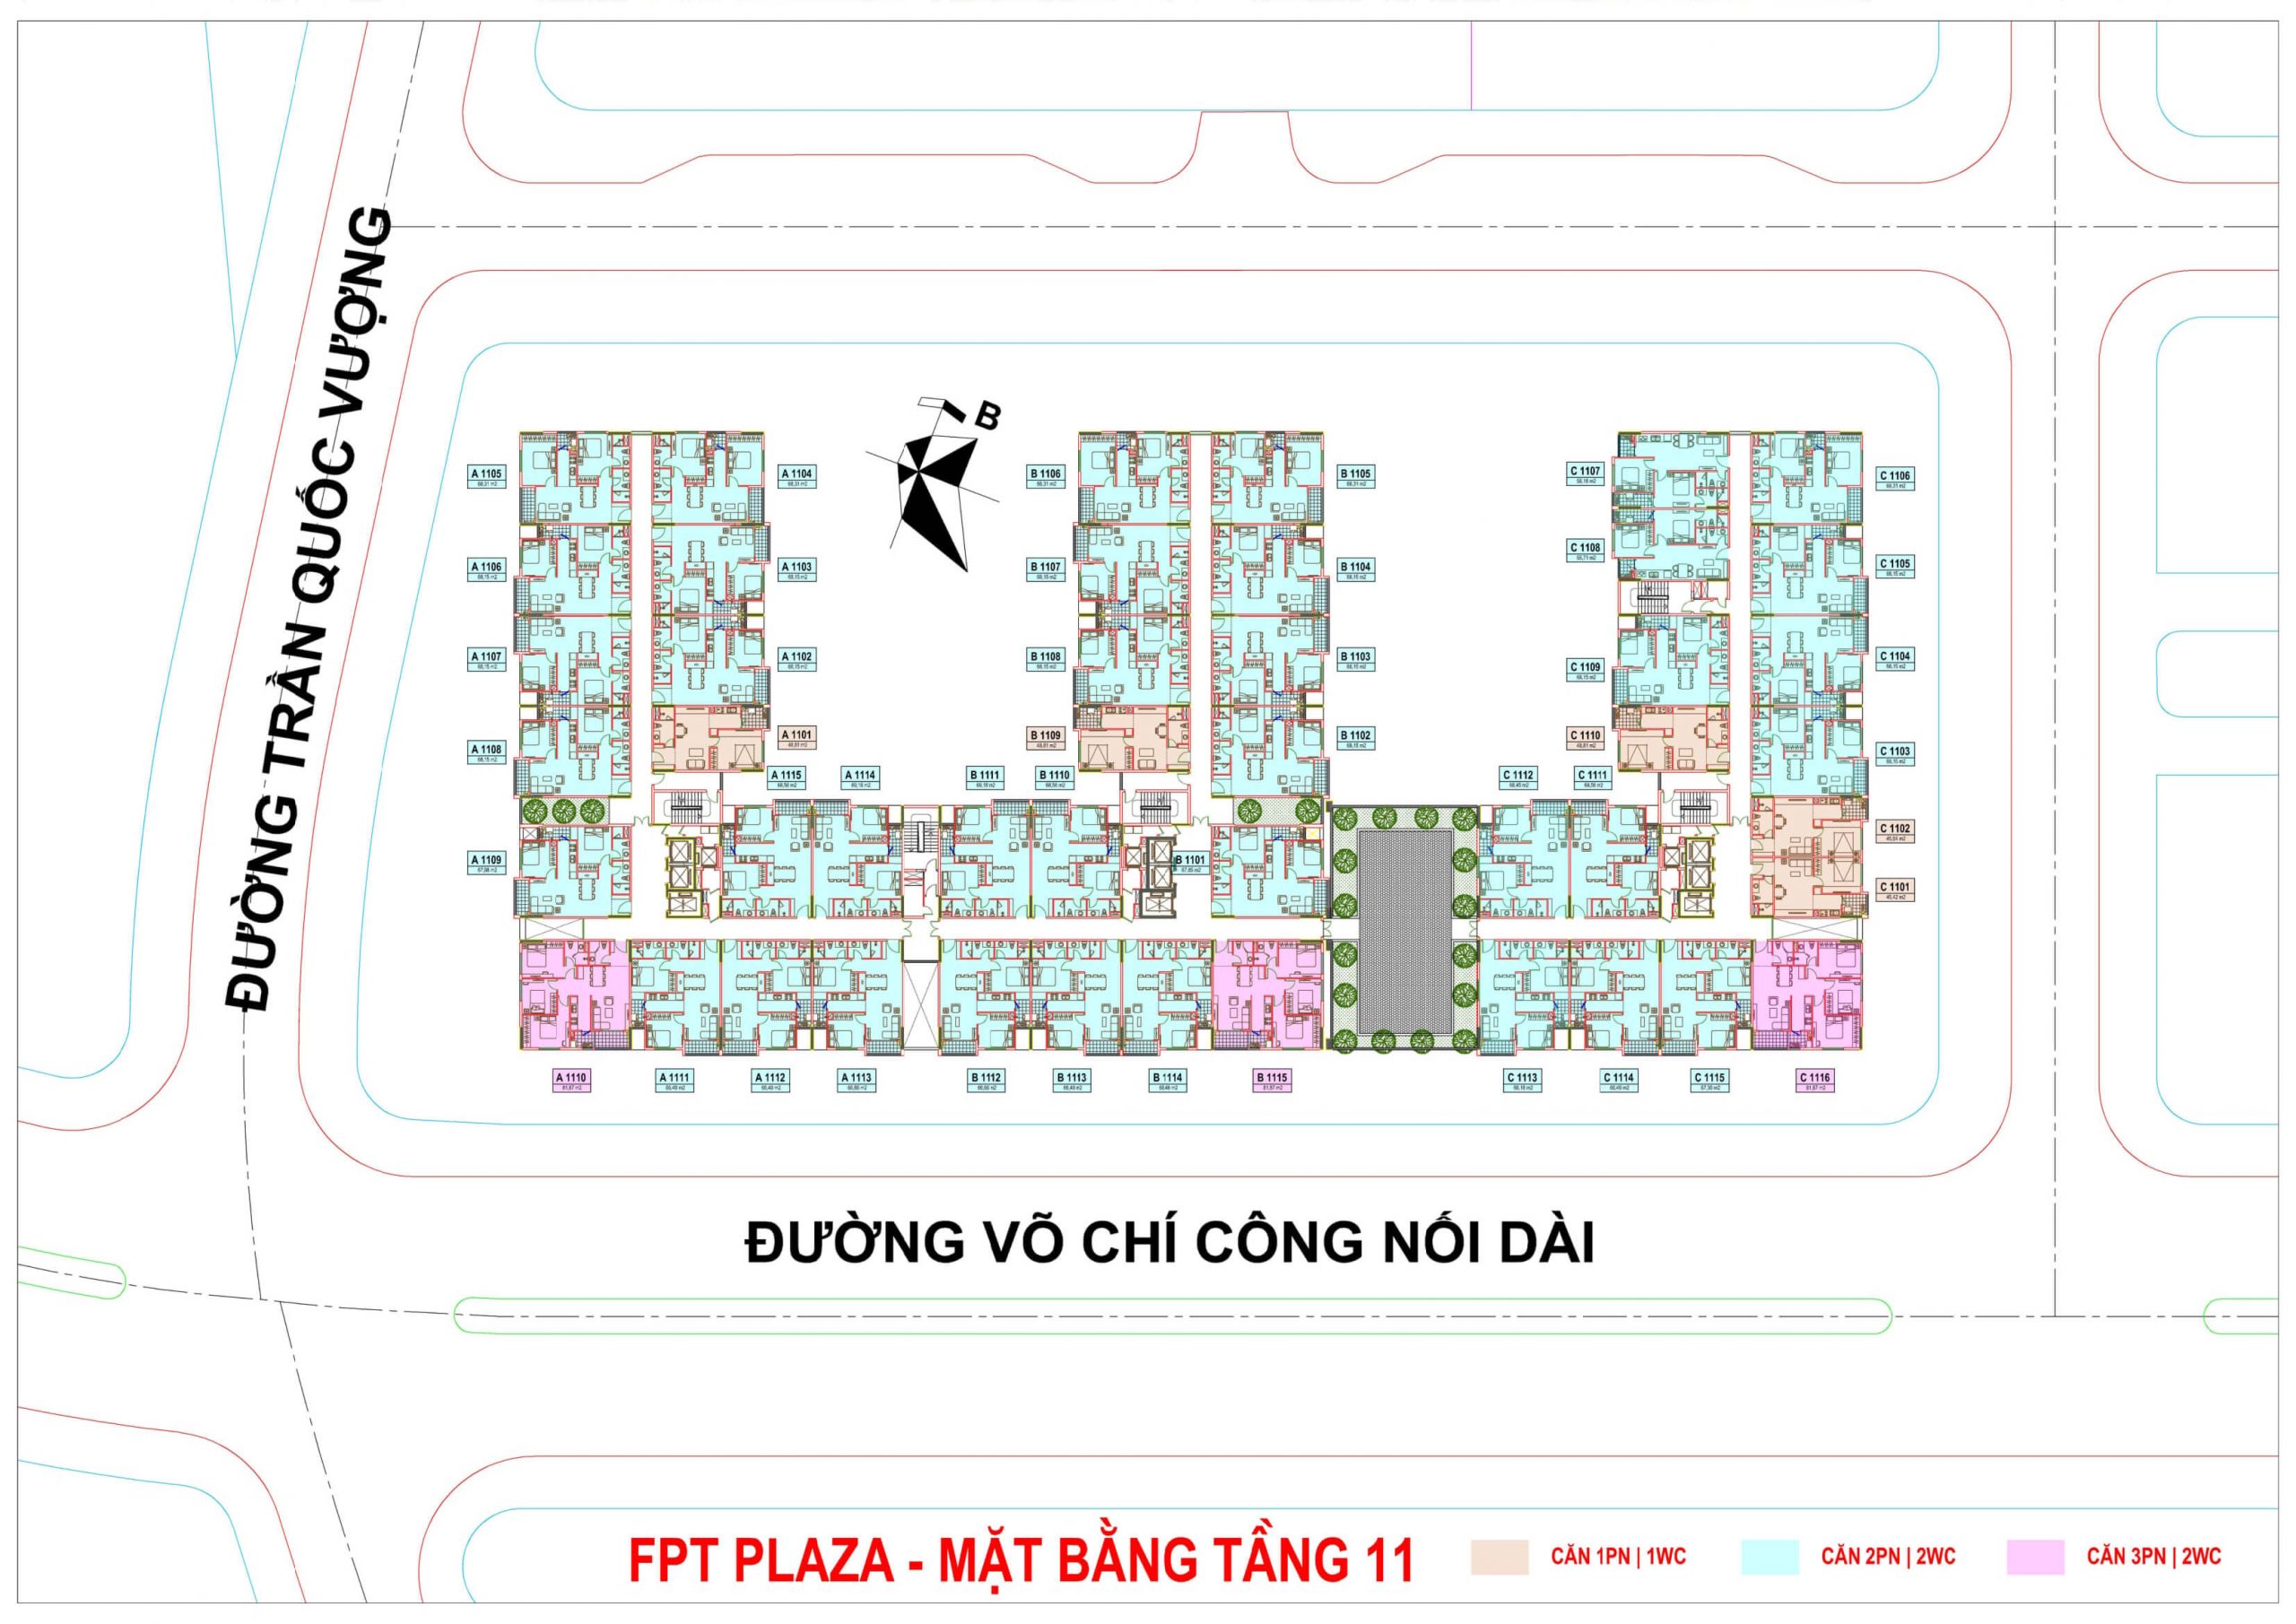 FPT PLAZA 1 Mặt bằng tầng 11